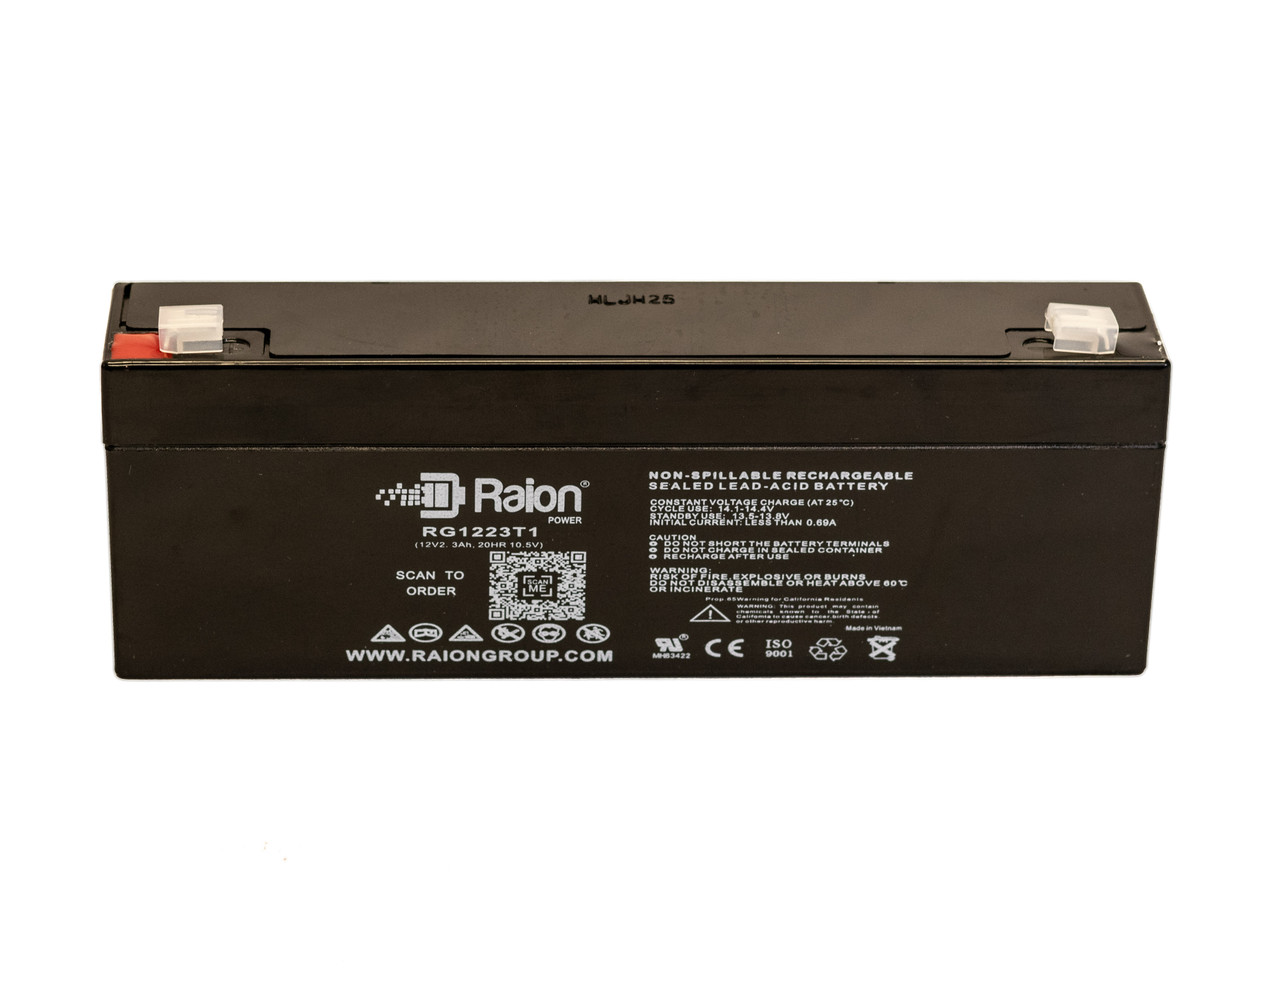 Raion Power RG1223T1 Replacement Battery Cartridge for Clary UPS1400VA1G